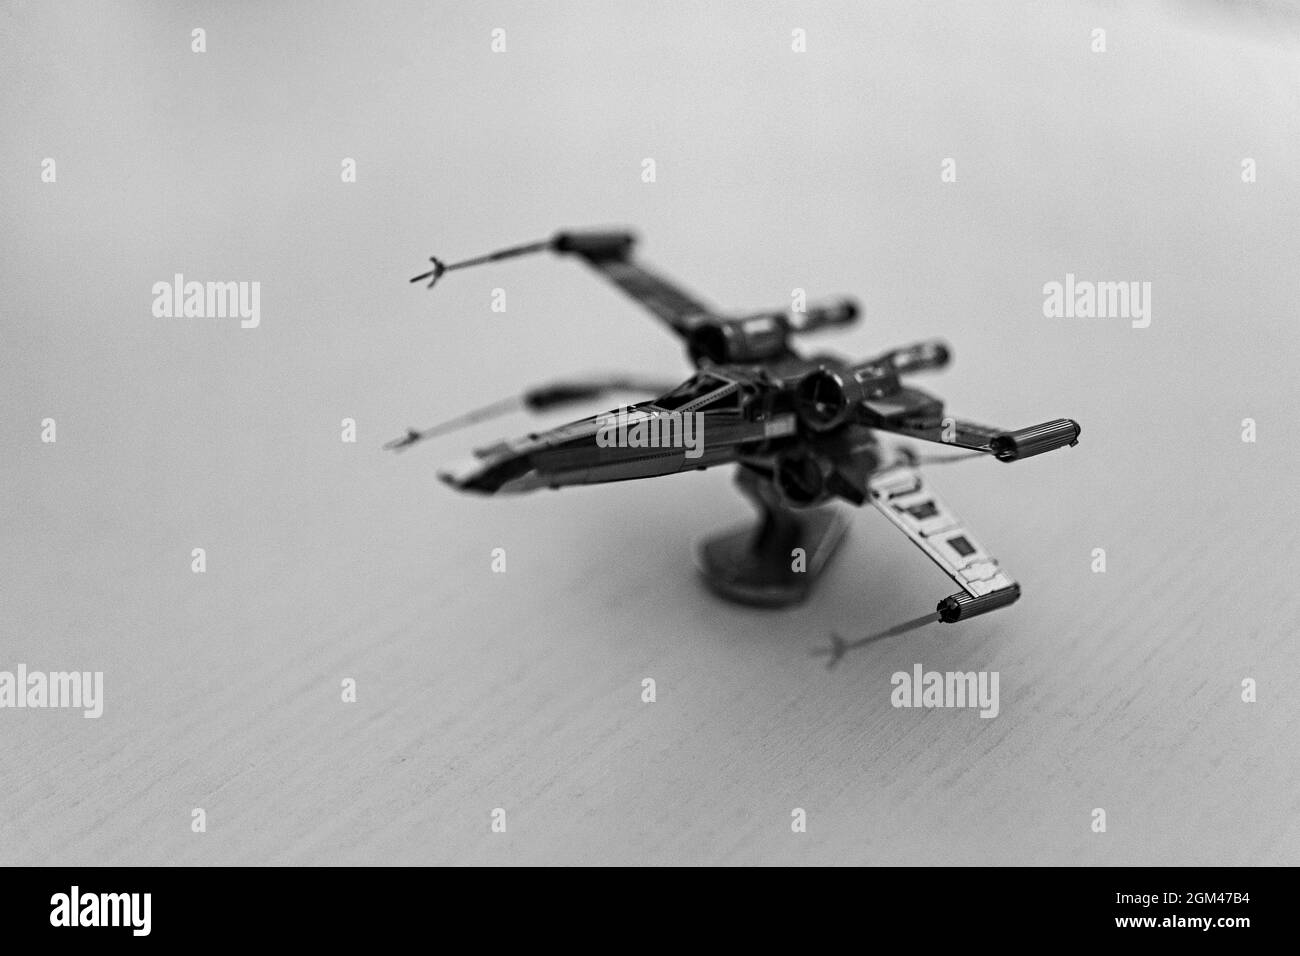 Grayscale shot of a small aircraft model Stock Photo